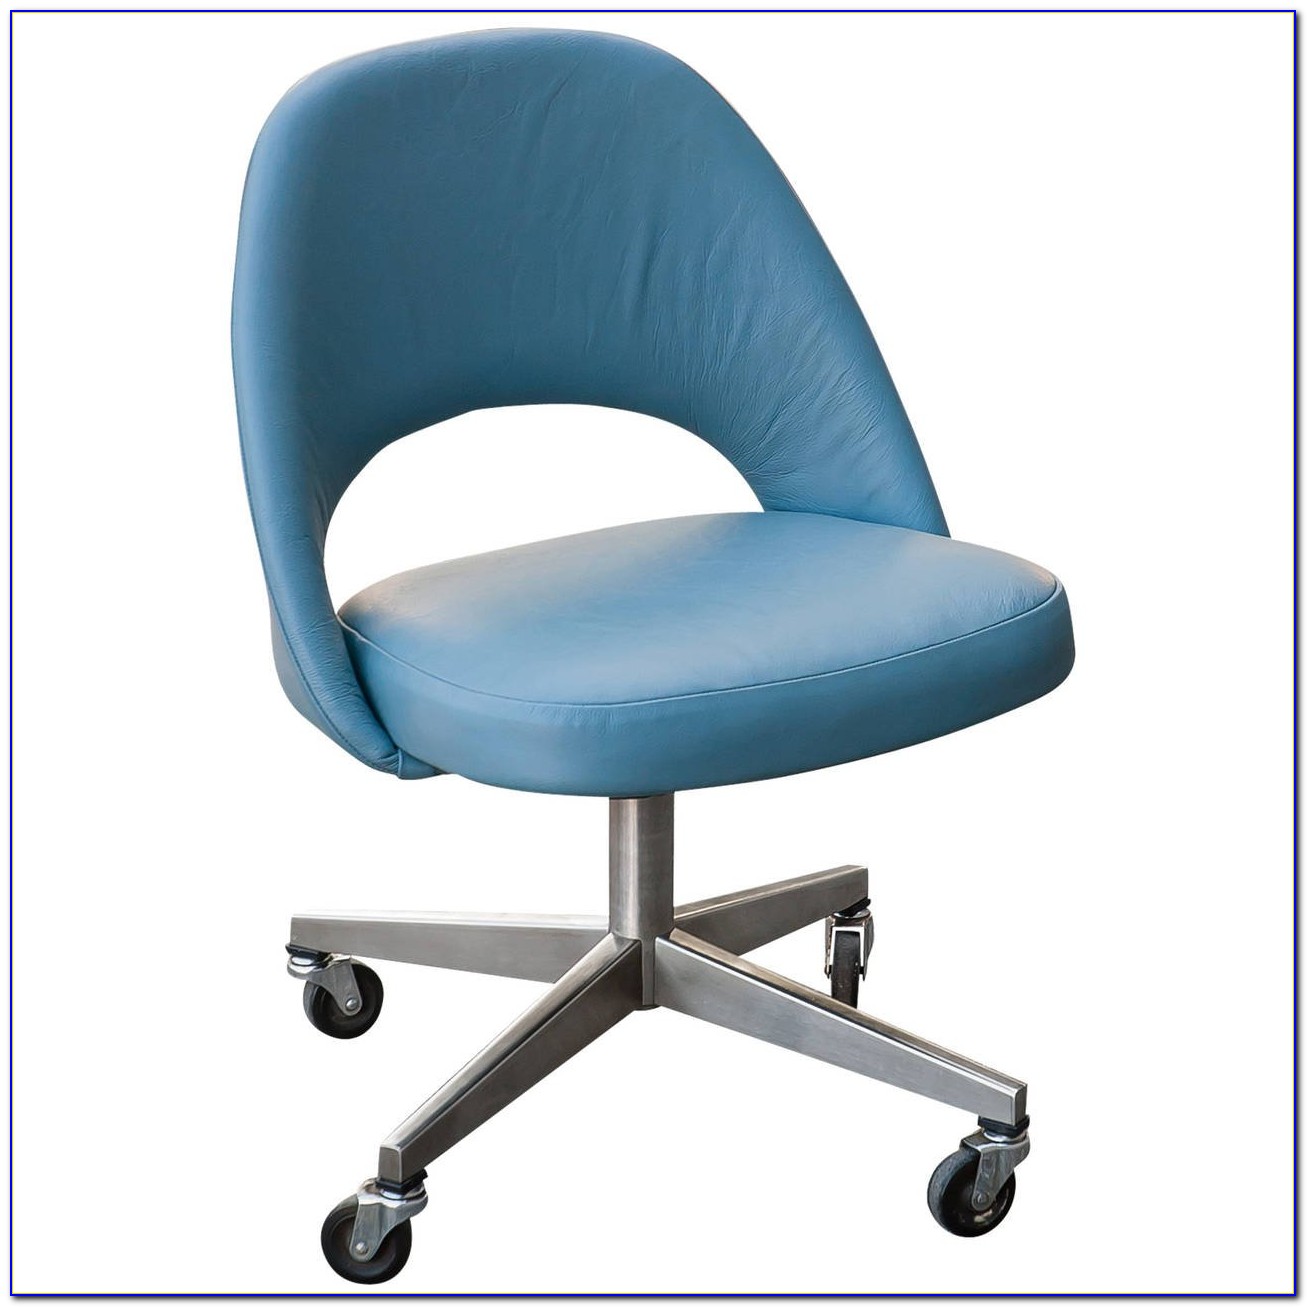 Unique Desk Chair Without Wheels Uk for Large Space